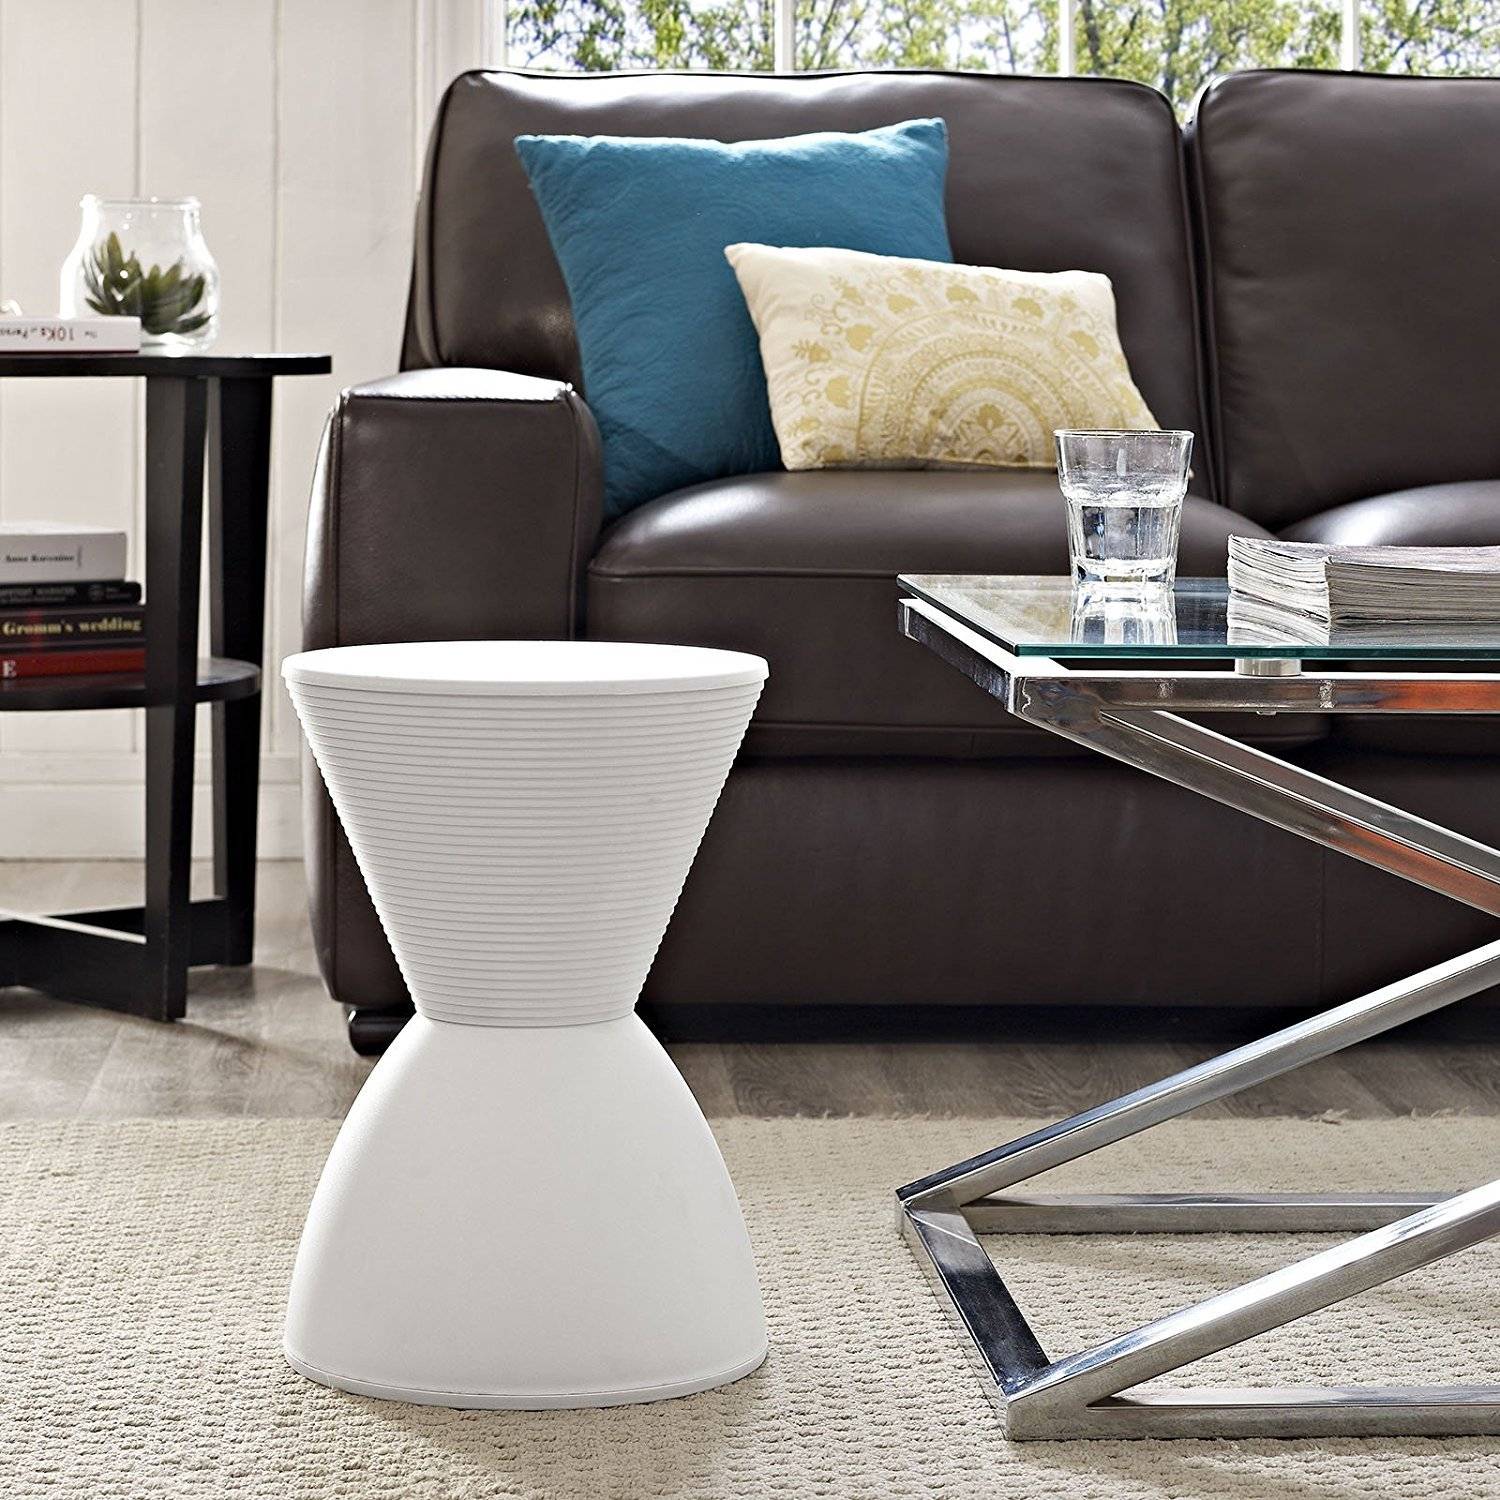 Modern hourglass accent stool from Amazon